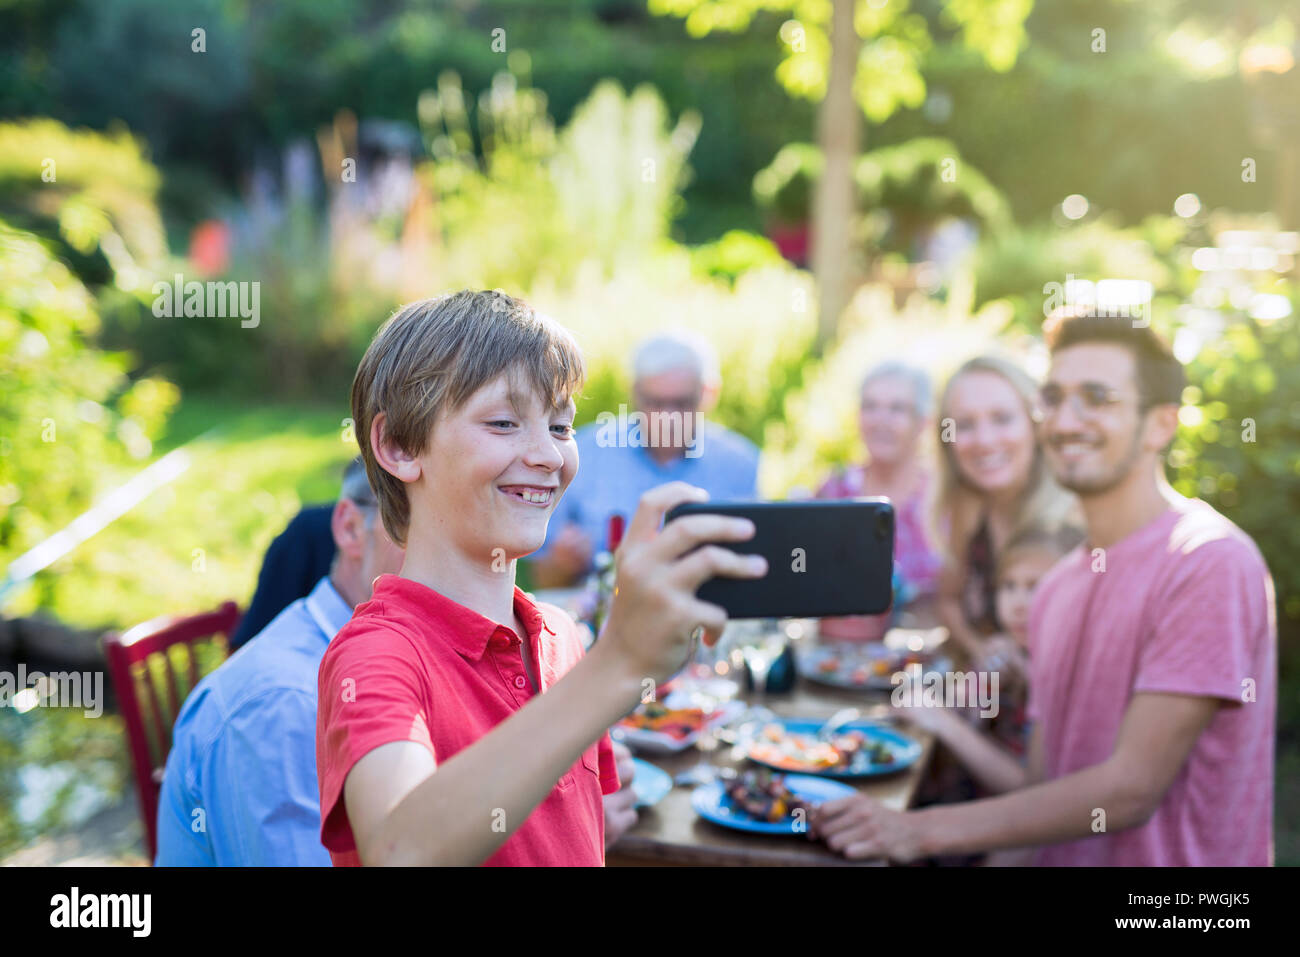 during a bbq a young boy does a selfie with the whole family Stock Photo